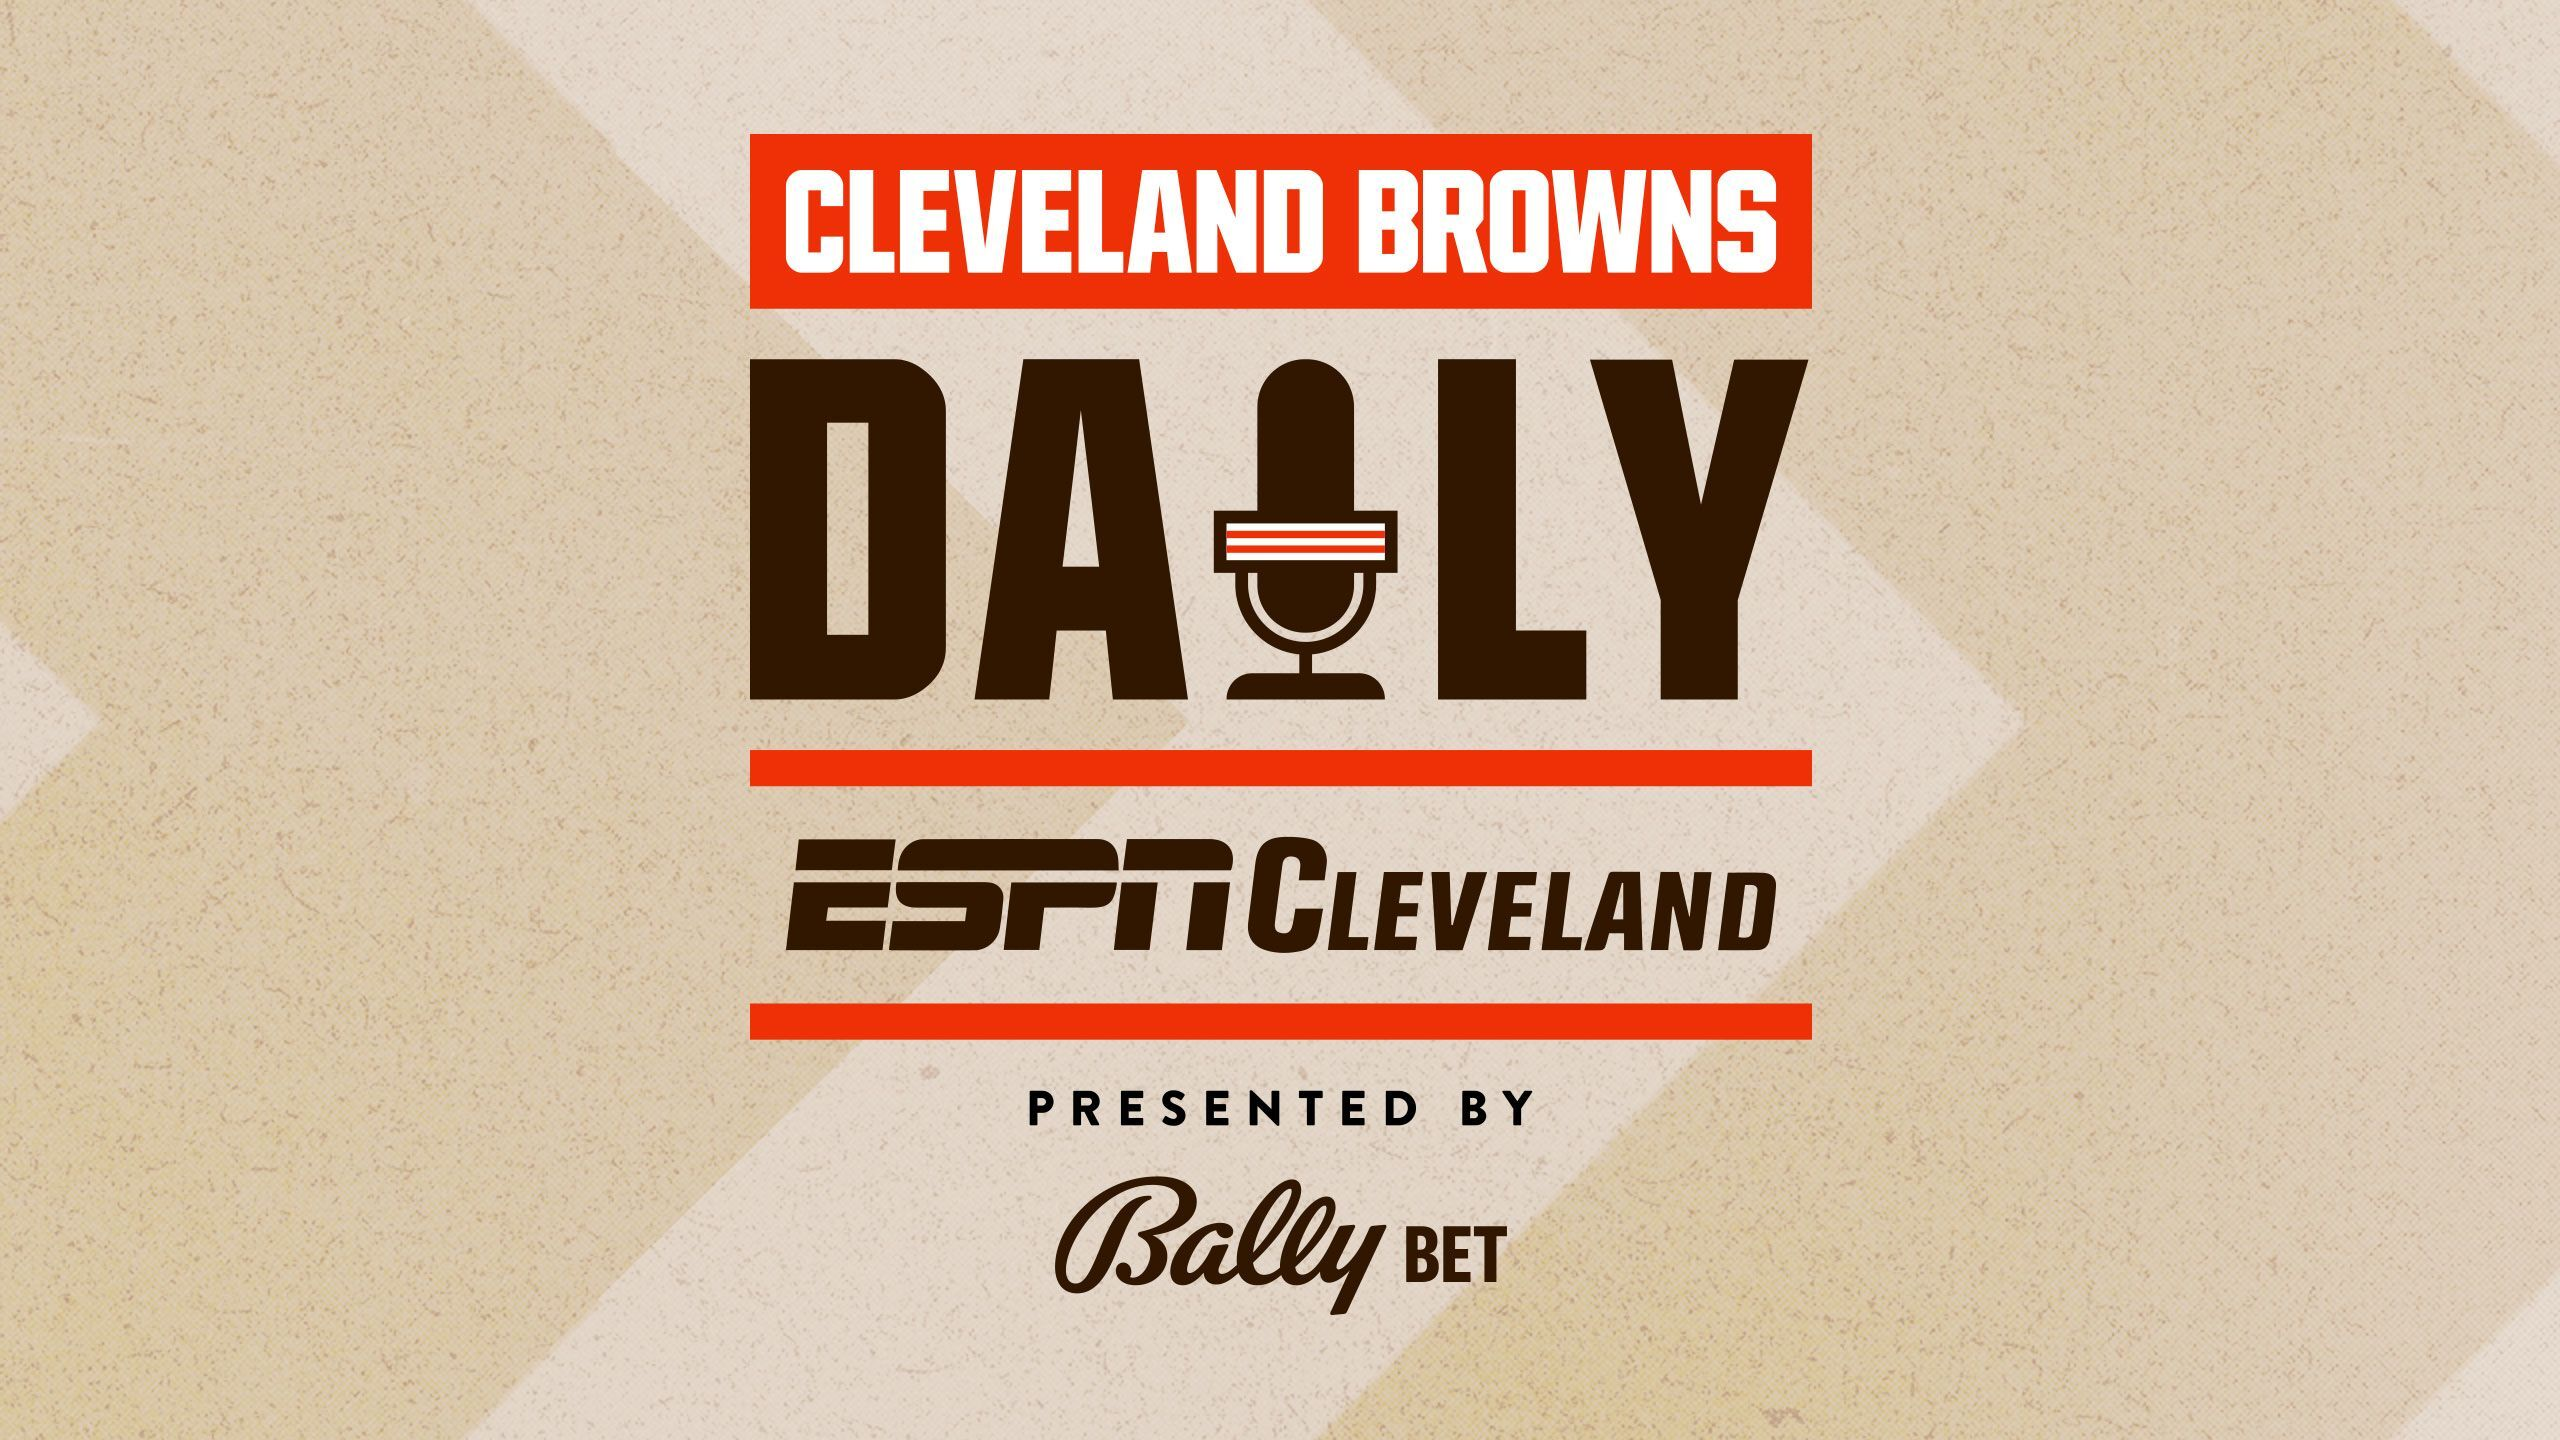 Browns Analyst Tyvis Powell talks Browns Draft Class | Cleveland Browns Daily | 5-8-24